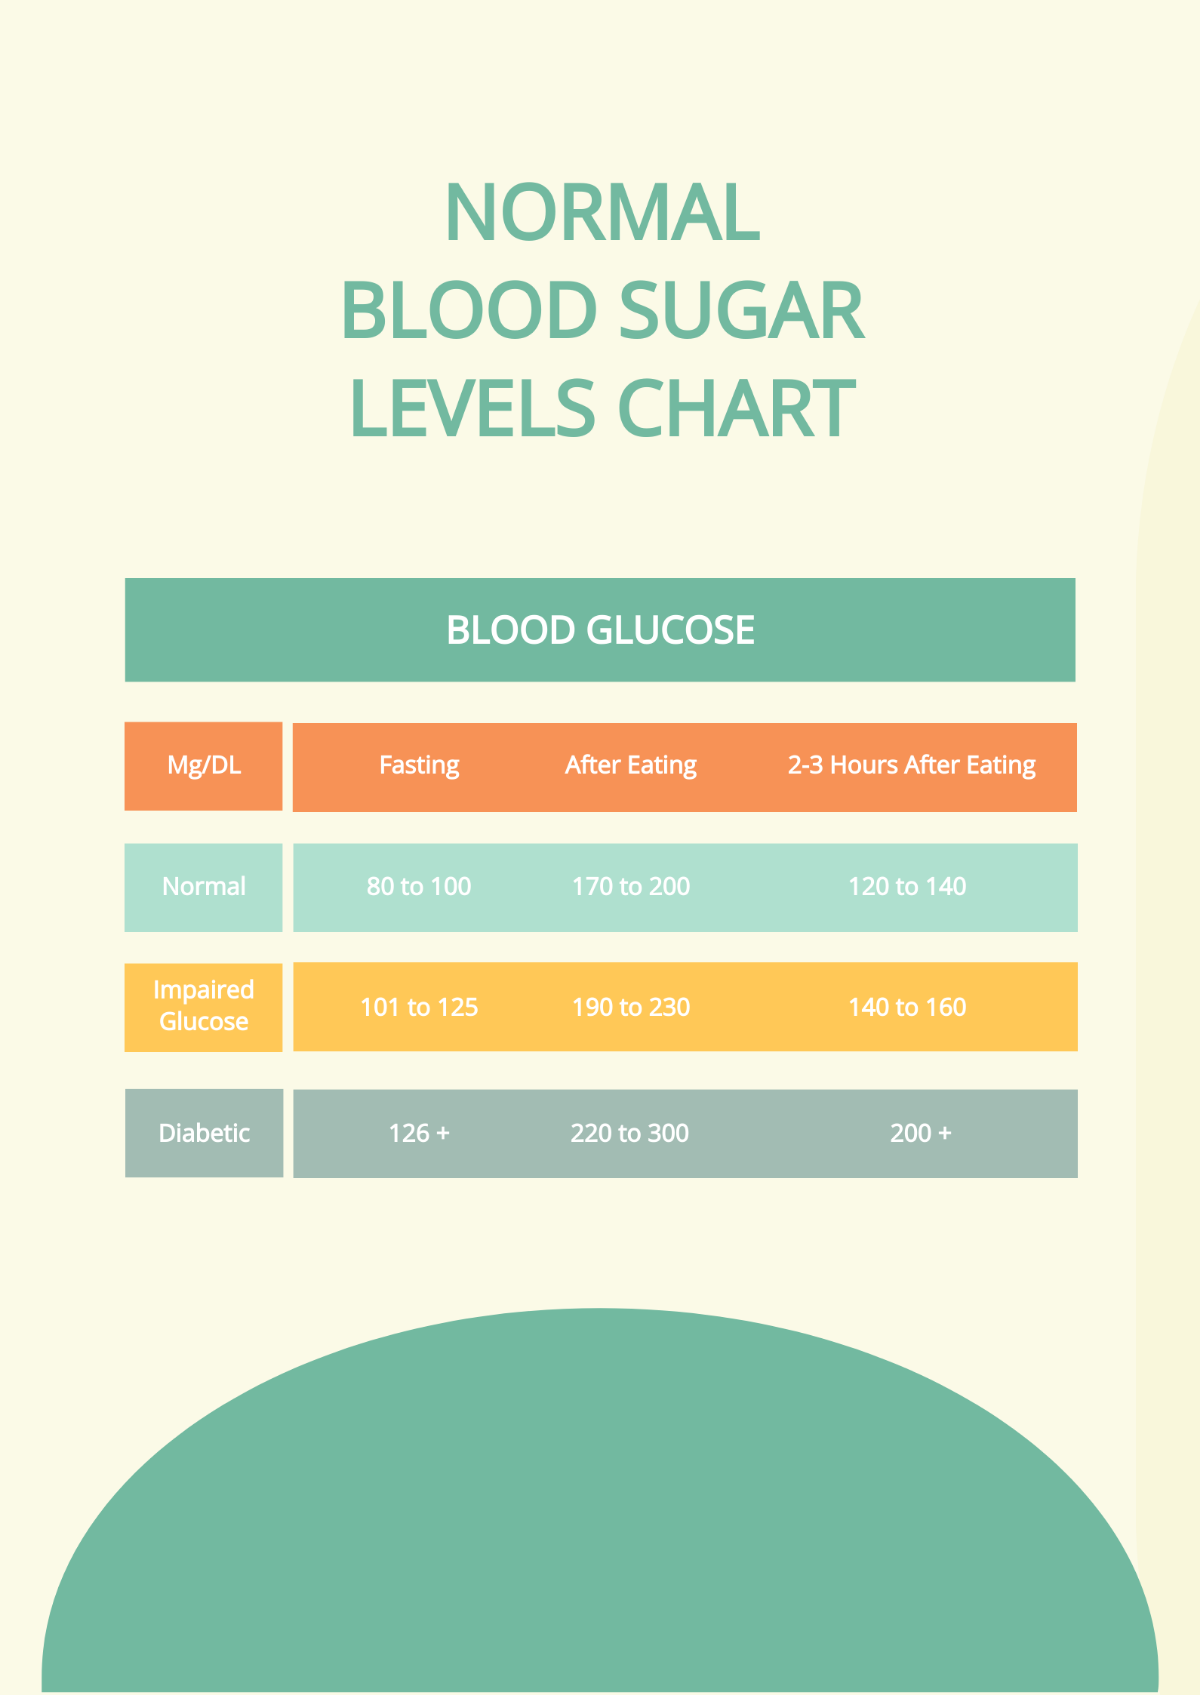 Normal Blood Sugar Levels Chart Template